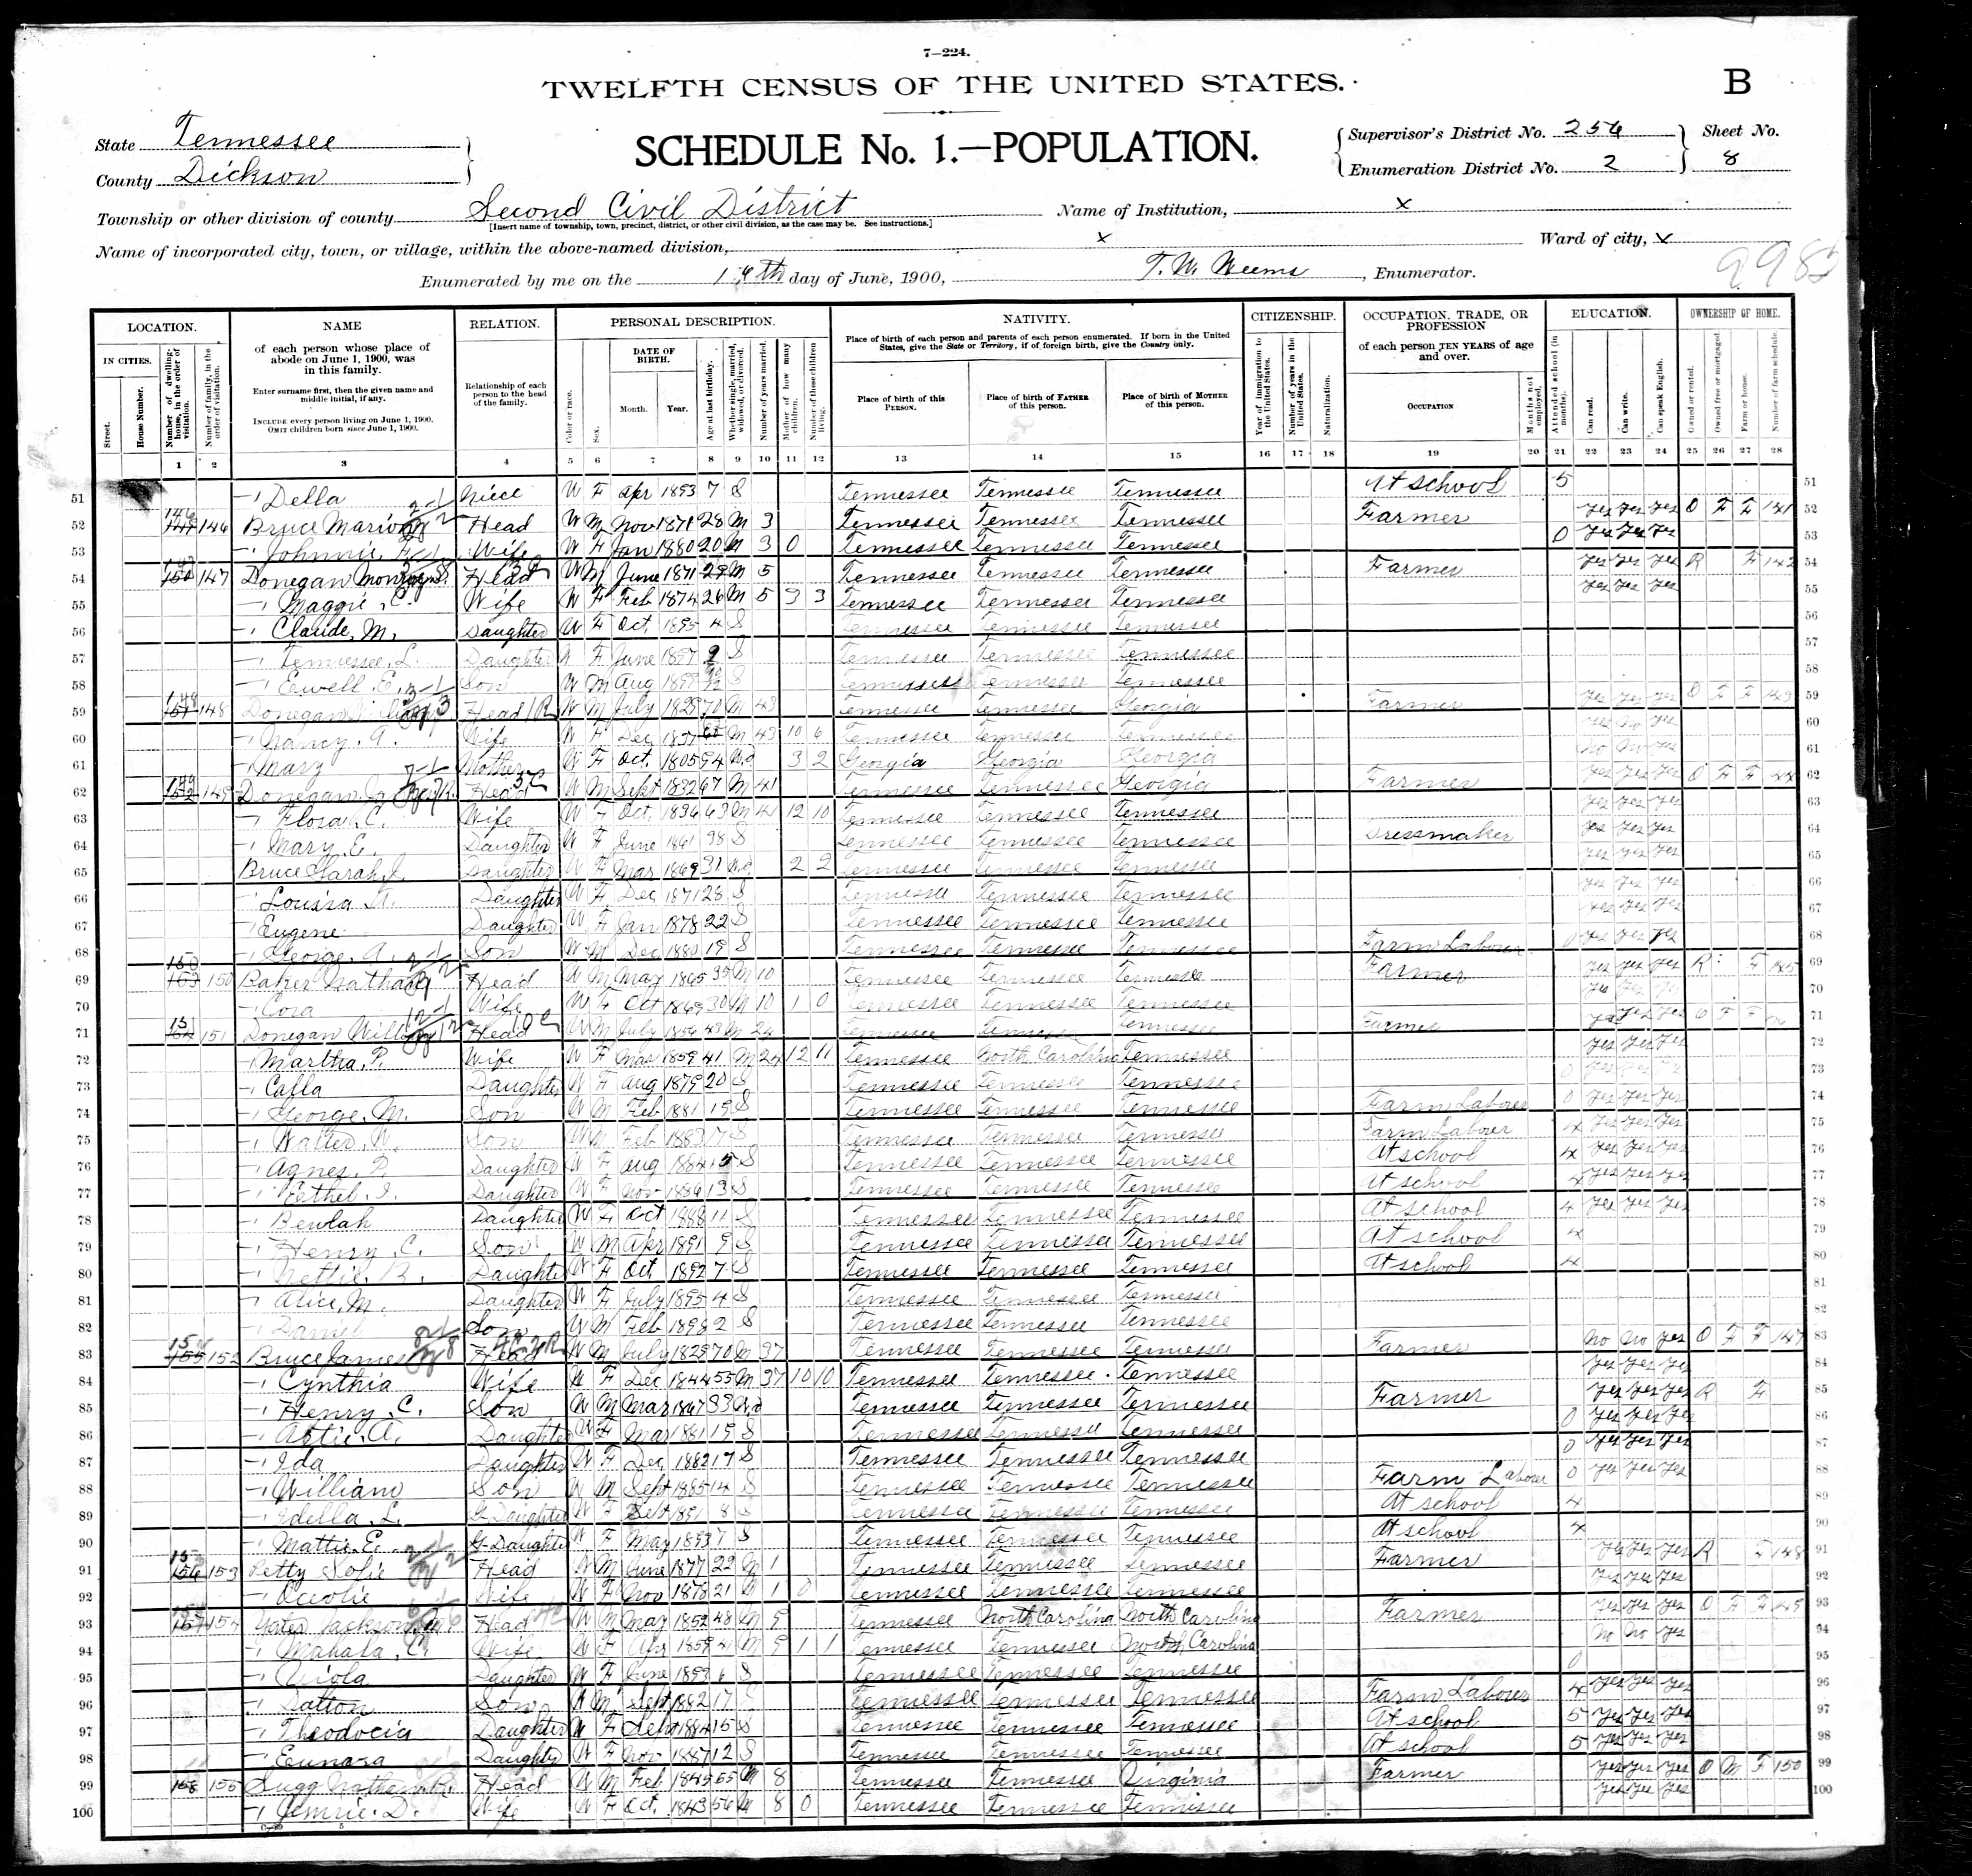 Mary (Brazzell) Donegan, 1900 Dickson County, Tennessee, census; in the home of her son, William J. Donegan.